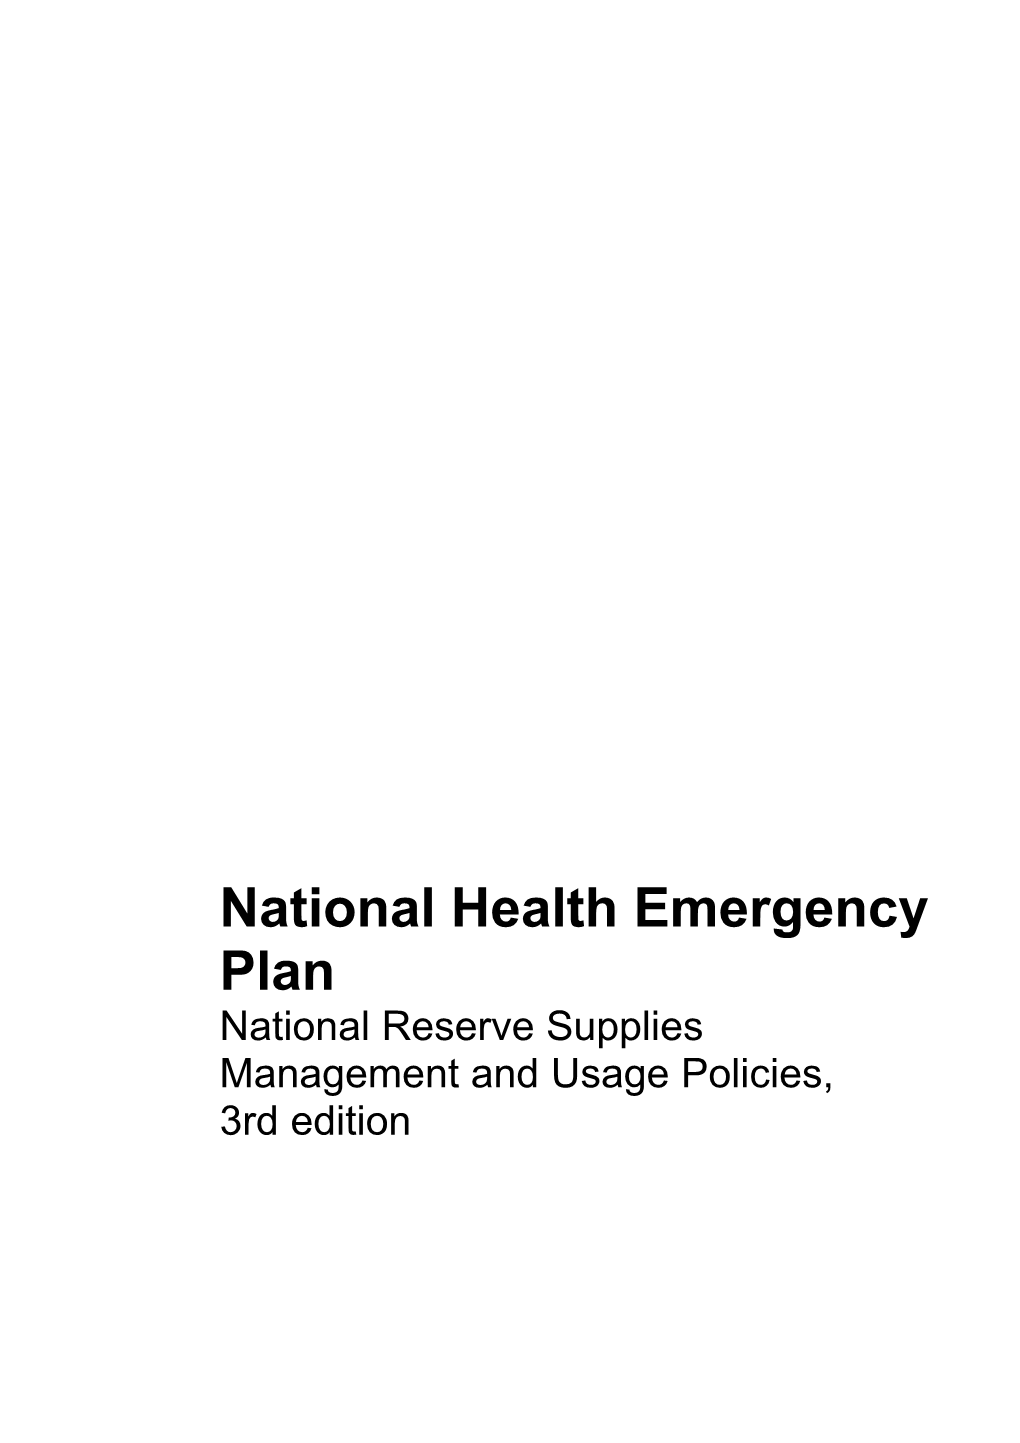 National Health Emergency Plan: National Reserve Supplies Management and Usage Policies